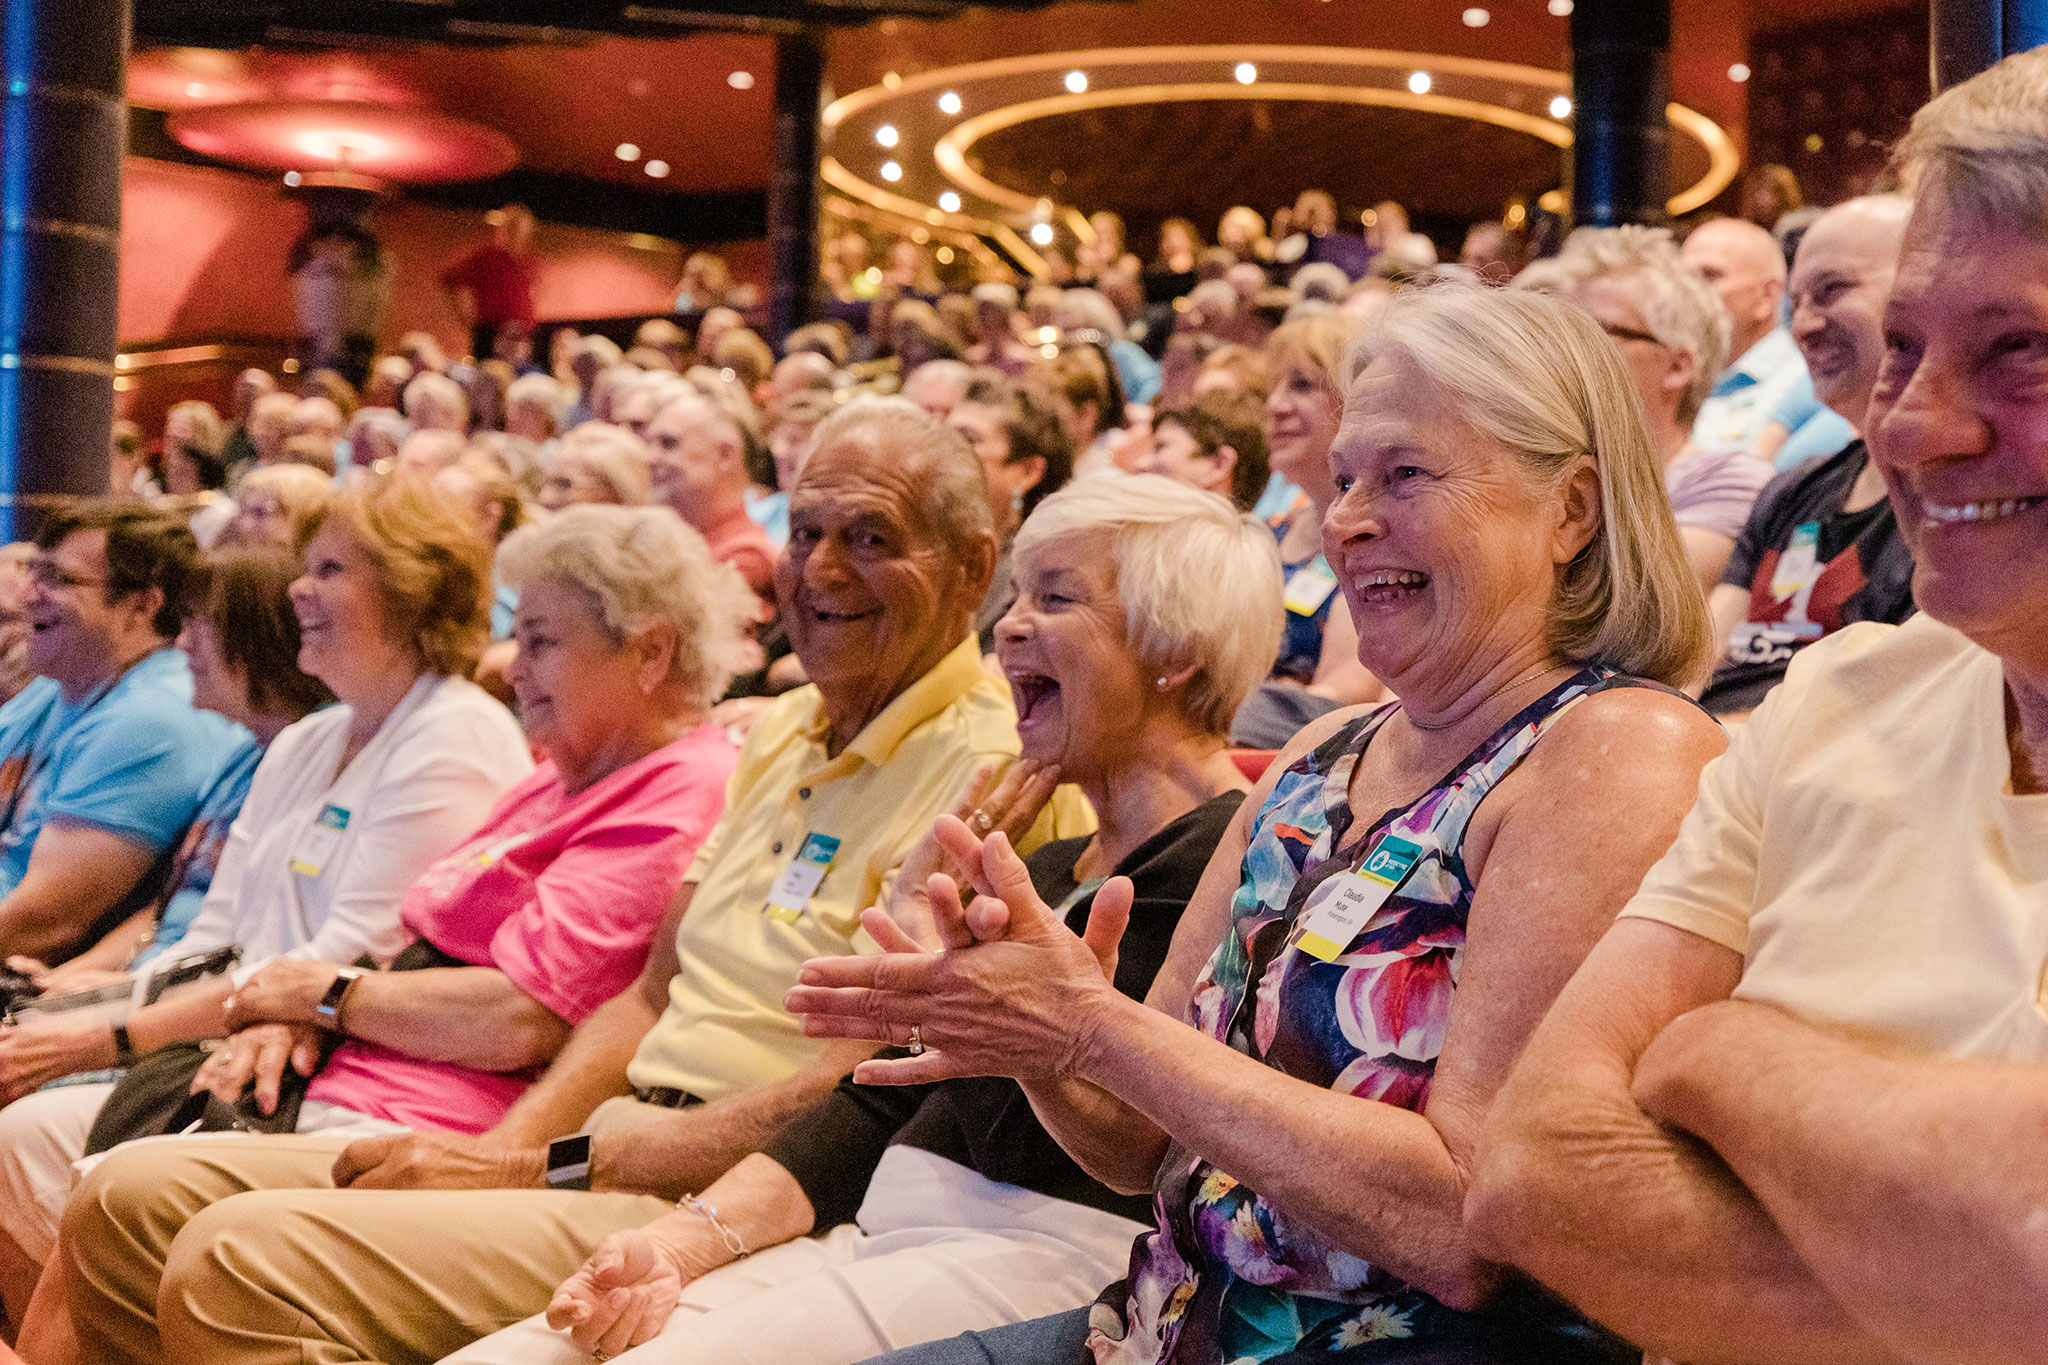 A group of elderly audience members enjoying a show in a theater, with many of them laughing and clapping, wearing colorful casual clothes and name tags.